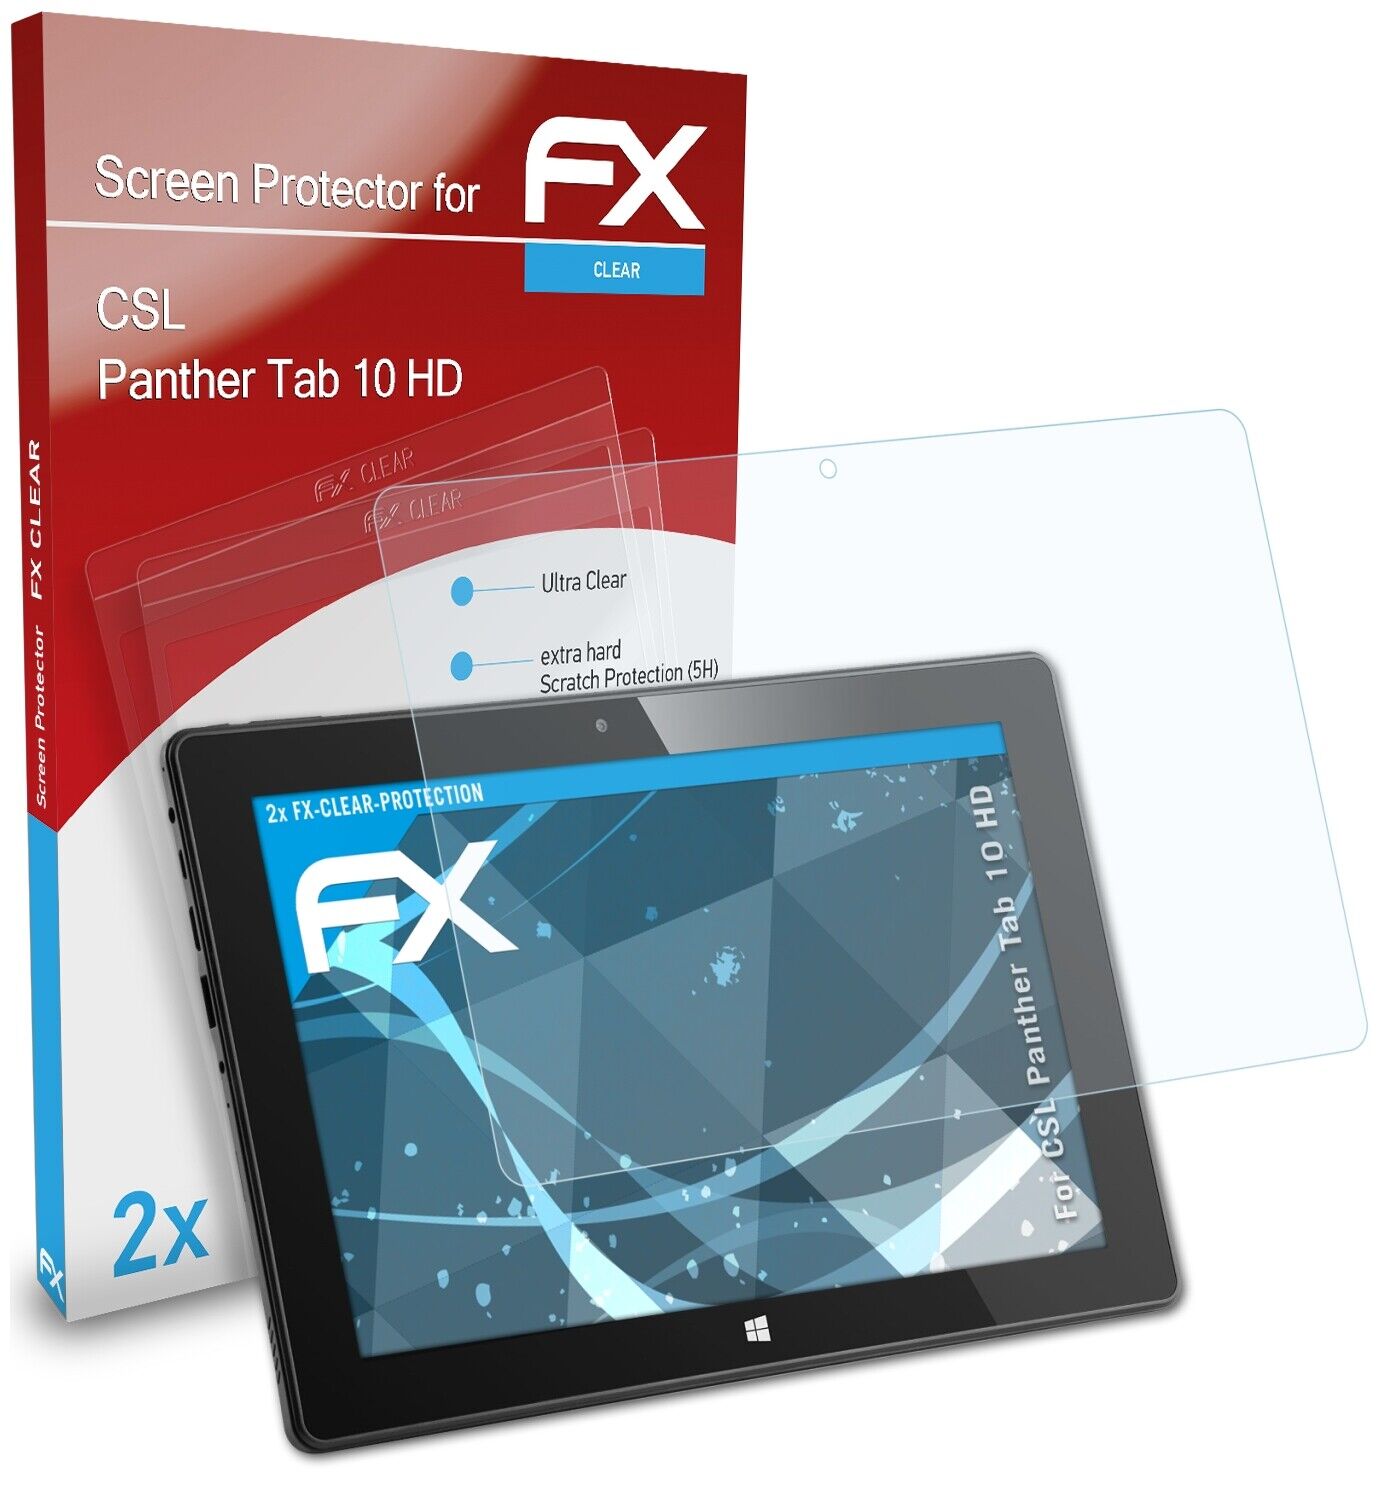 atFoliX 2x Screen Protector for CSL Panther Tab 10 HD clear